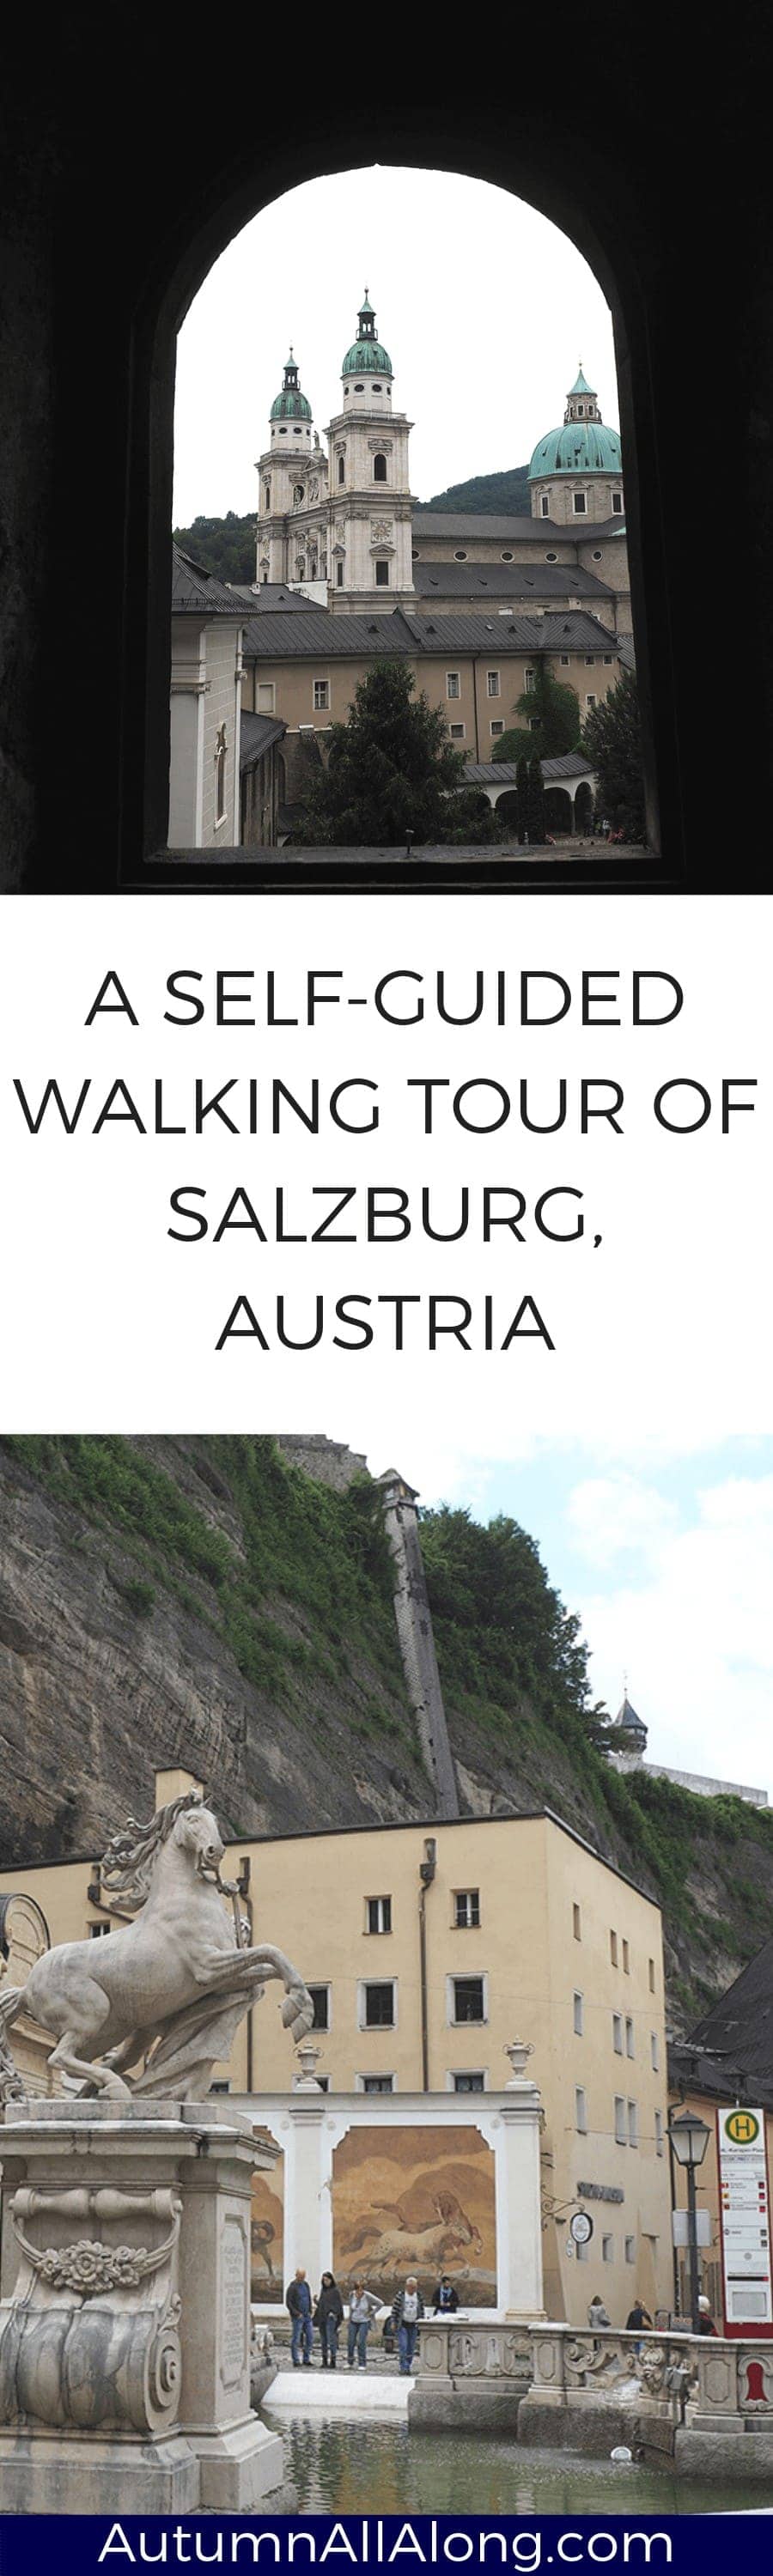 Our self-guided walking tour of Salzburg with our favorite details of our trip to Salzburg, Austria. | via Autumn All Along